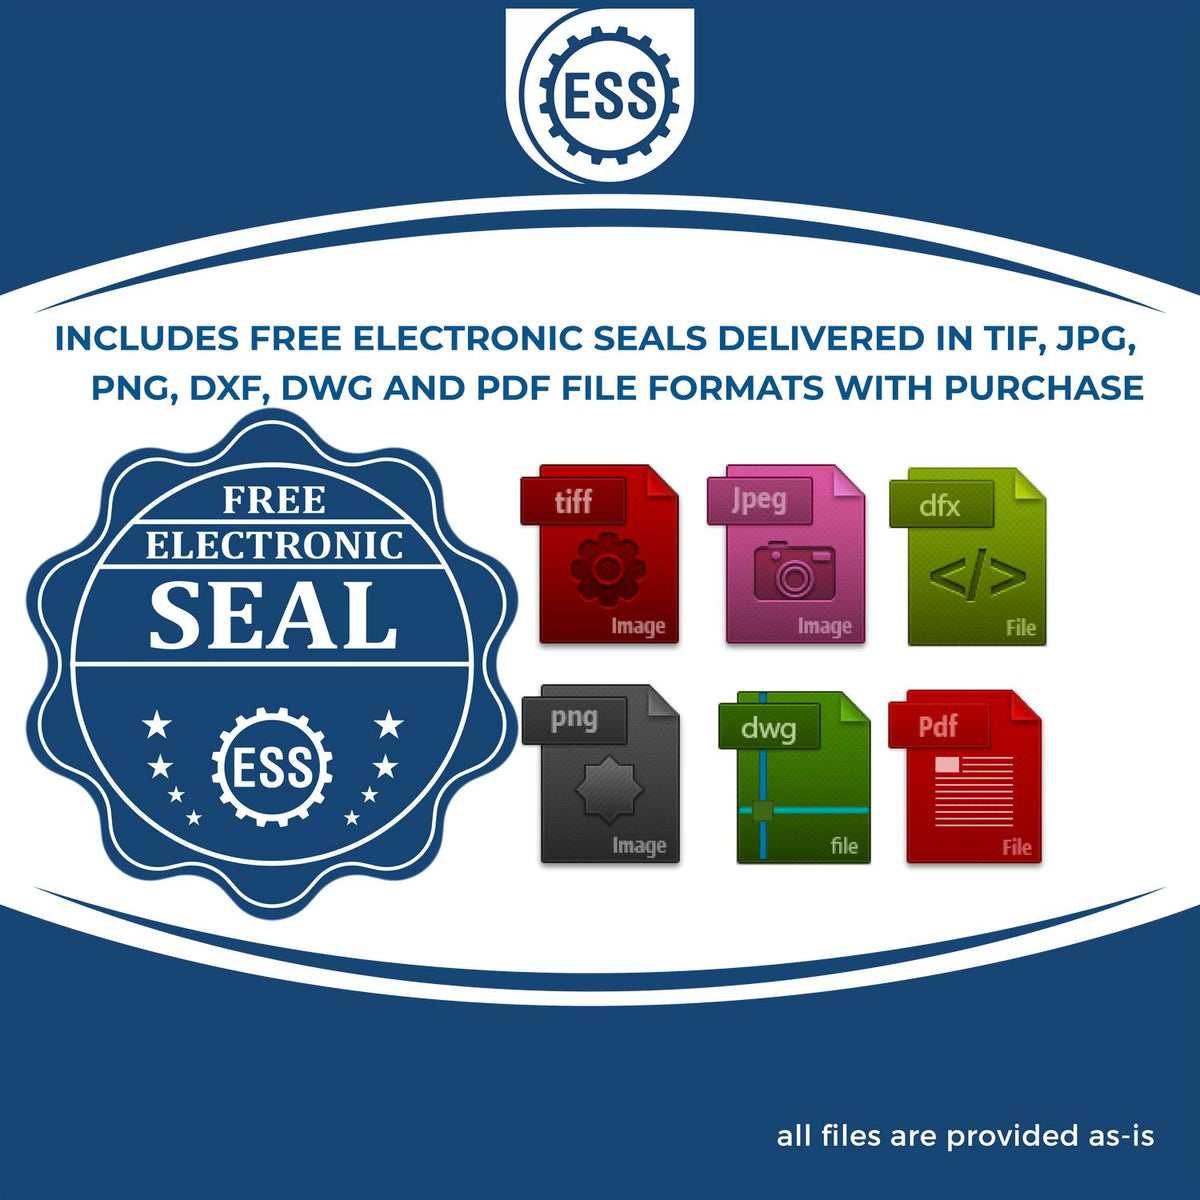 An infographic for the free electronic seal for the Premium MaxLight Pre-Inked Alaska Engineering Stamp illustrating the different file type icons such as DXF, DWG, TIF, JPG and PNG.